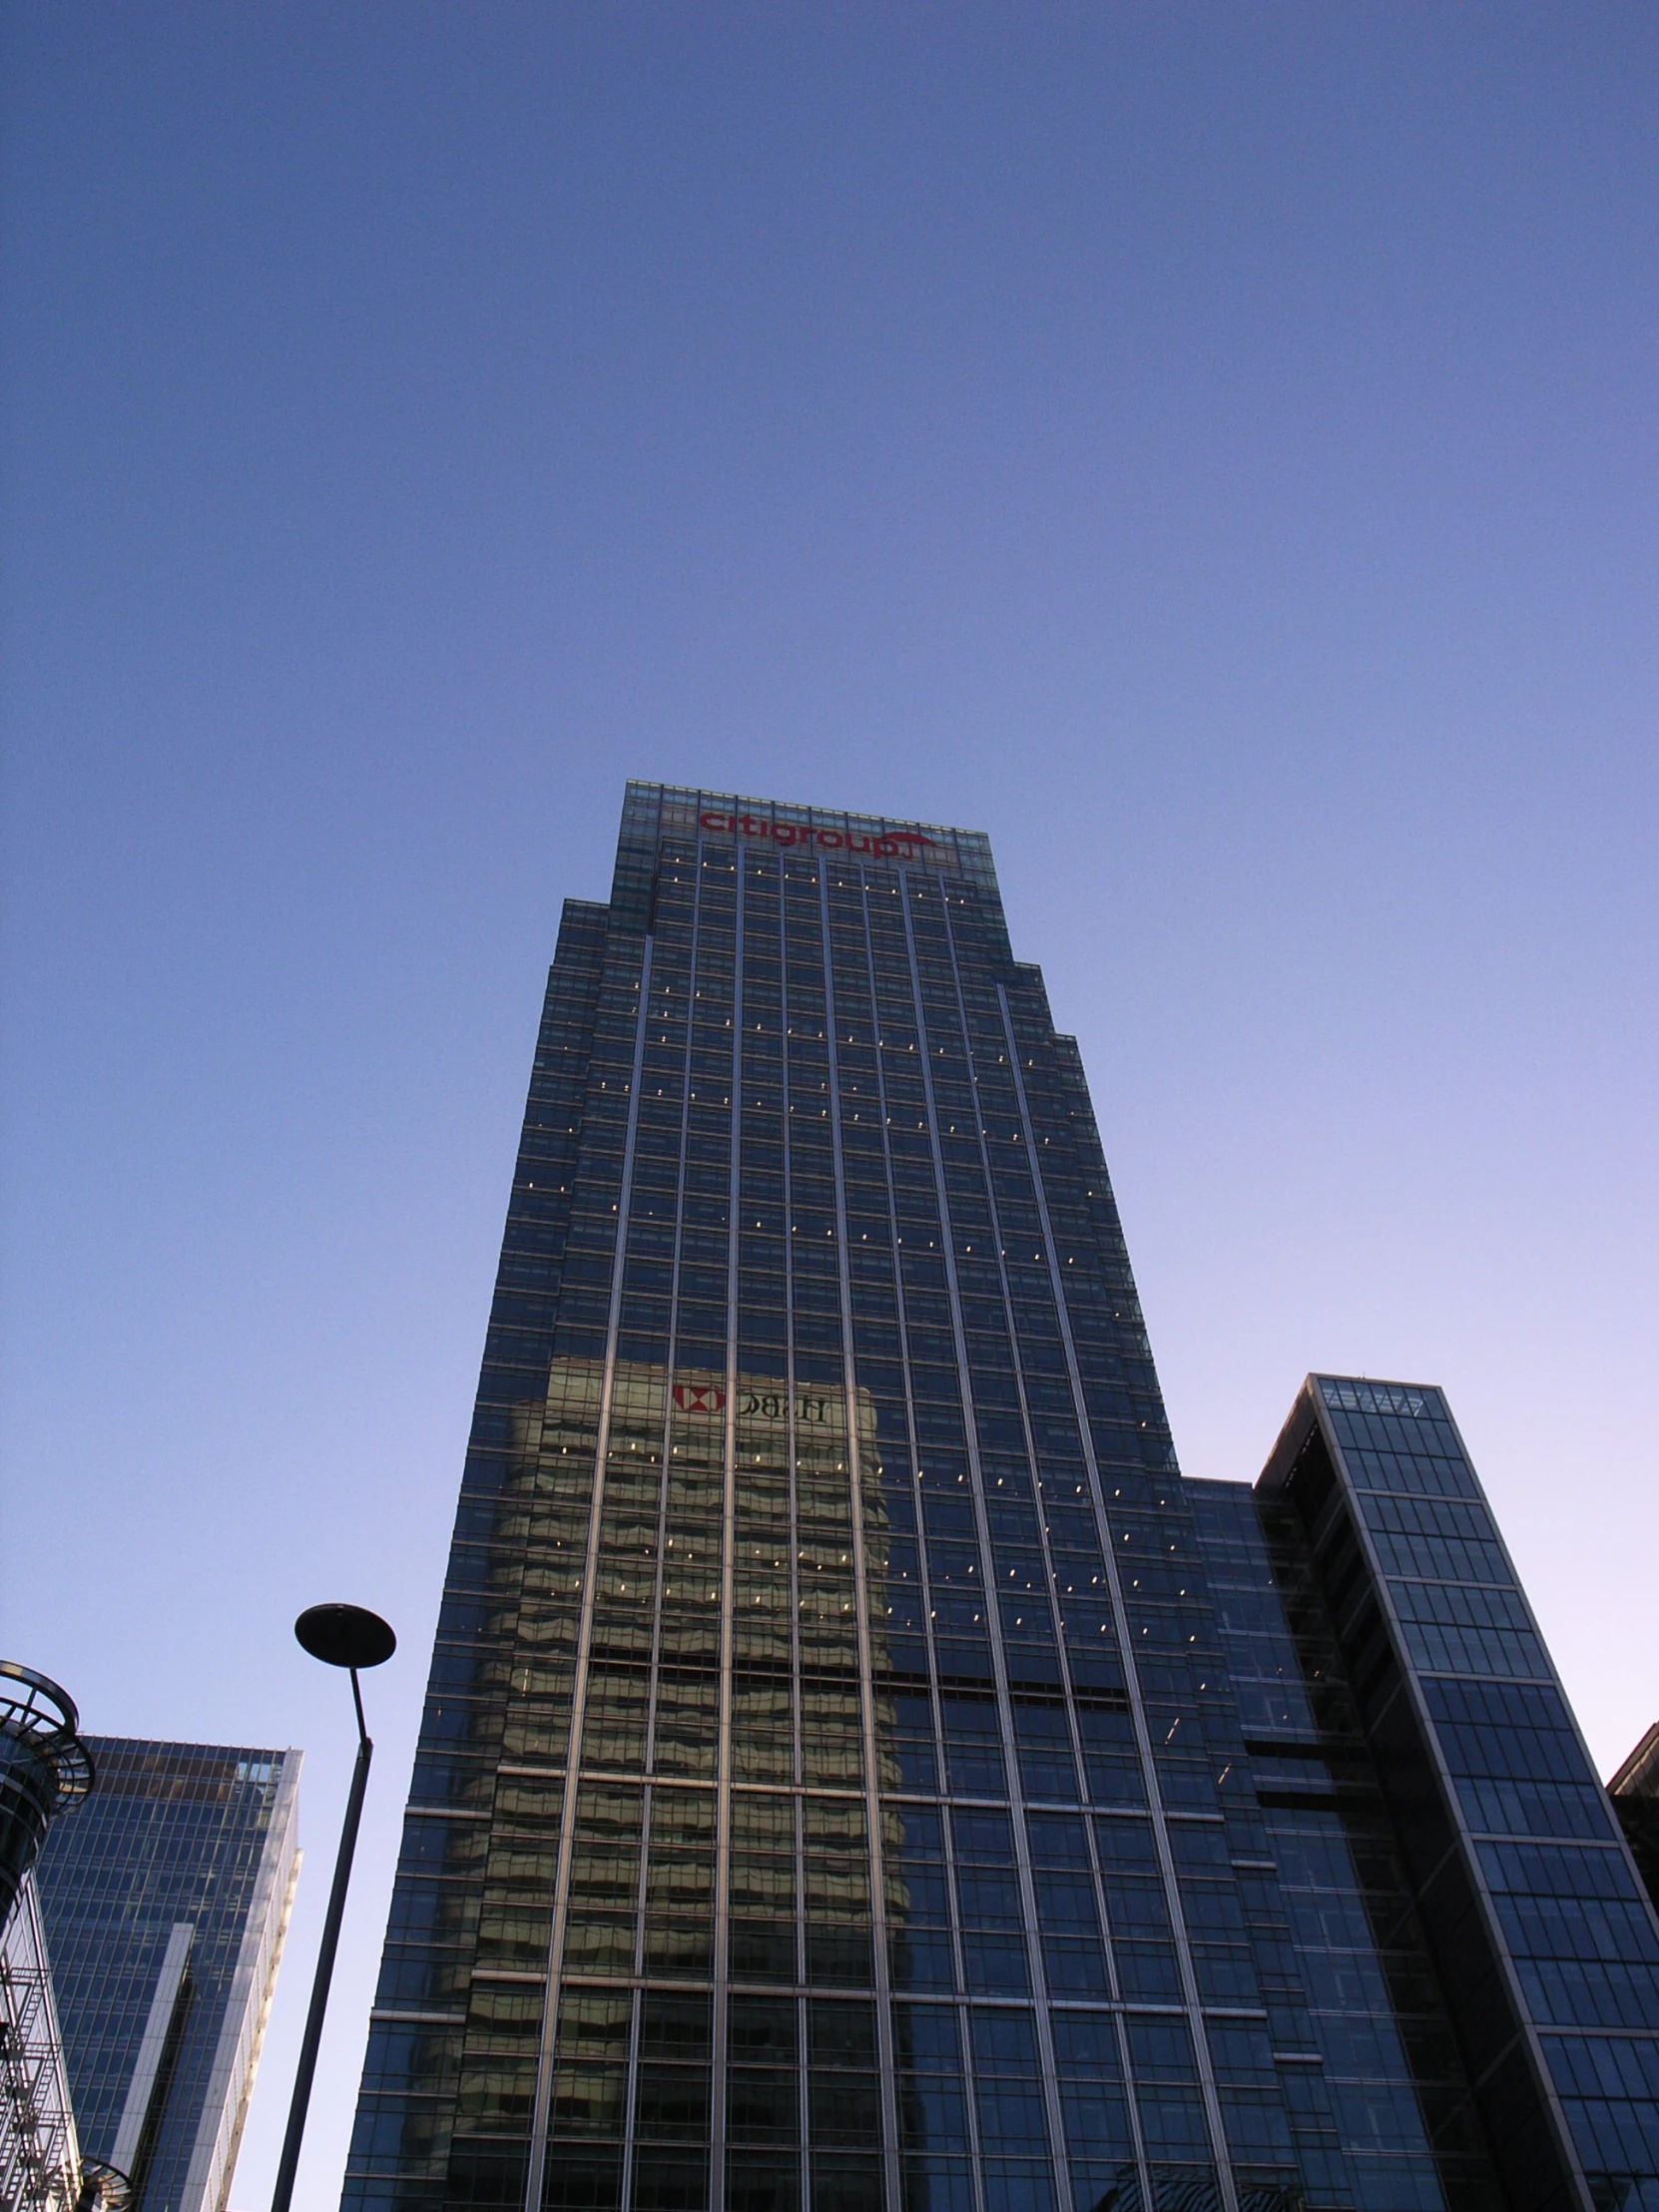 an upward s of the skyscr building